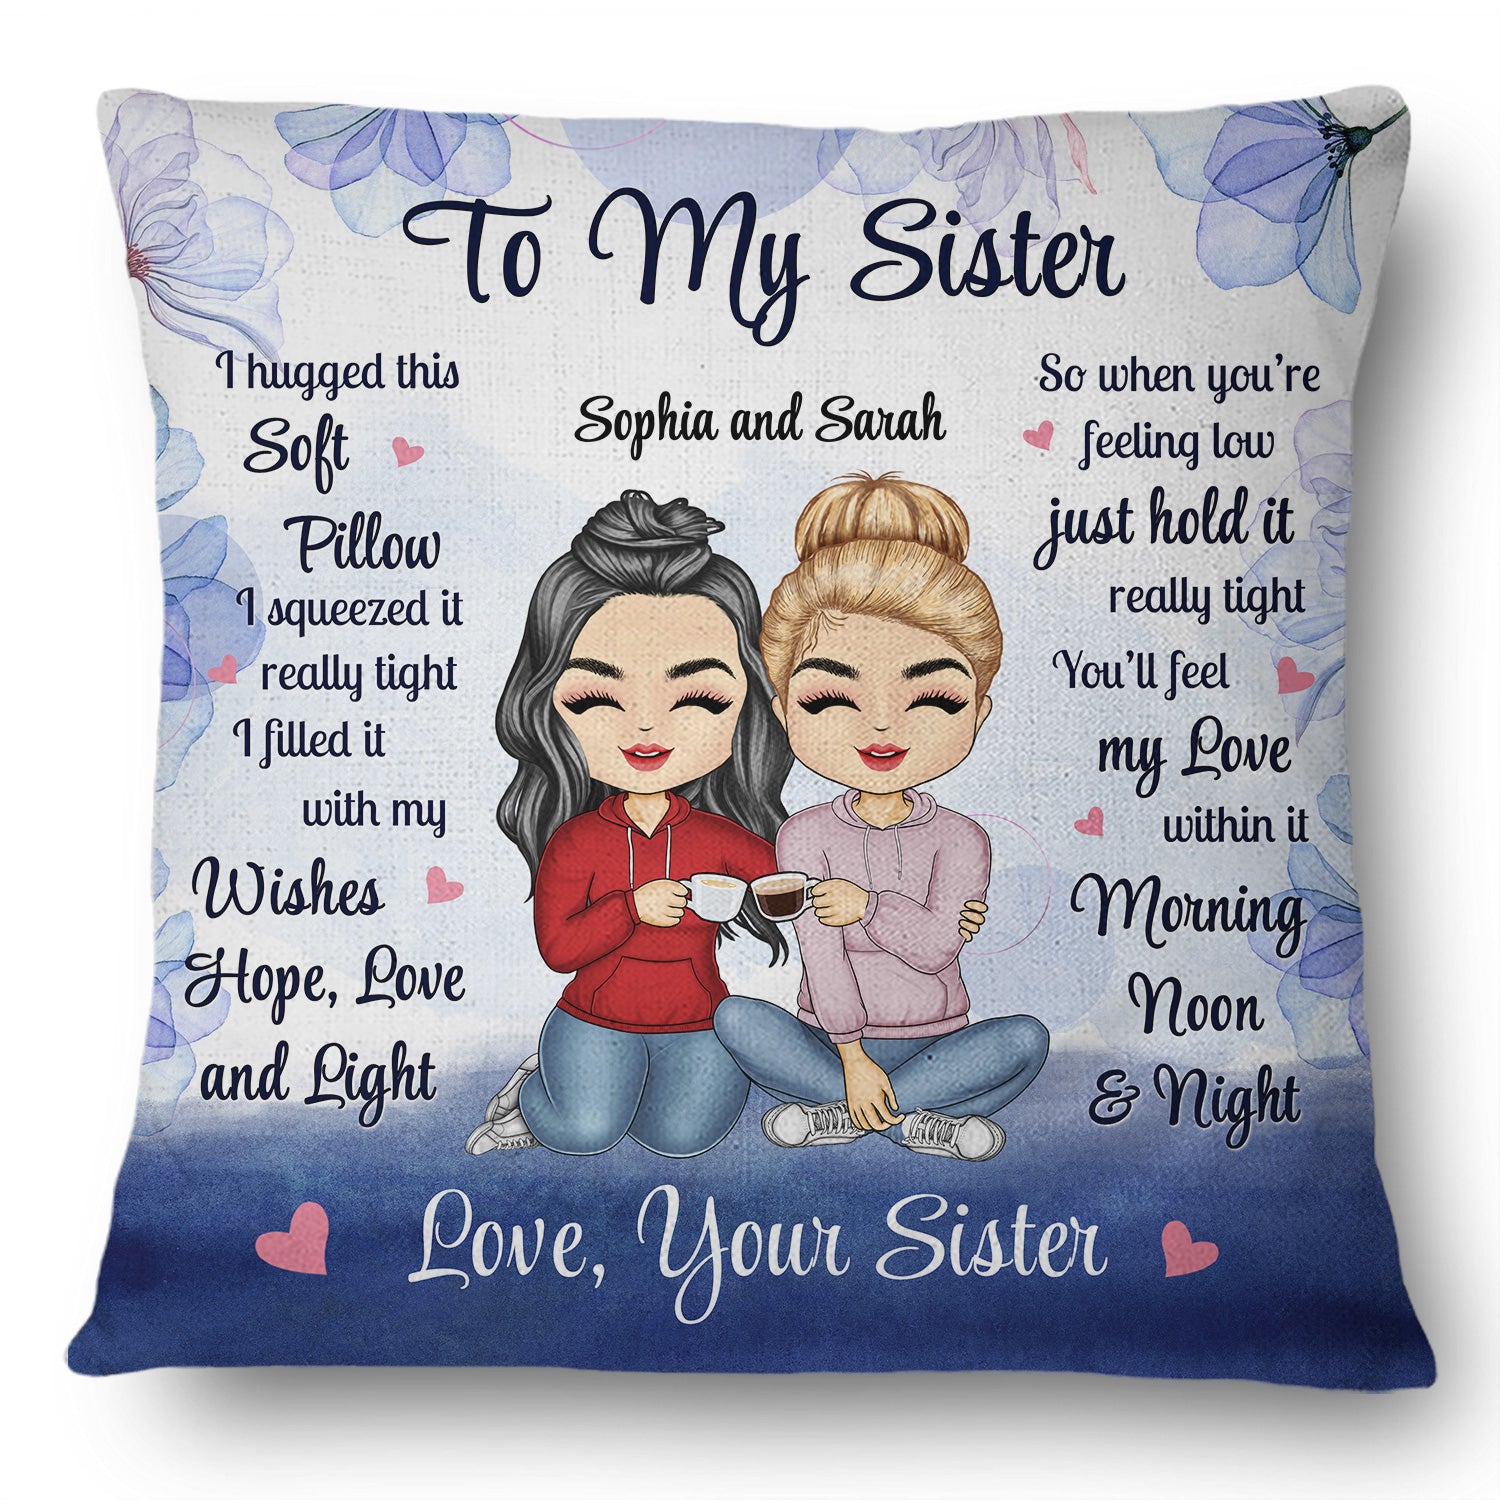 Hug This Pillow Morning Noon Night - Gift For Sister - Personalized Pillow